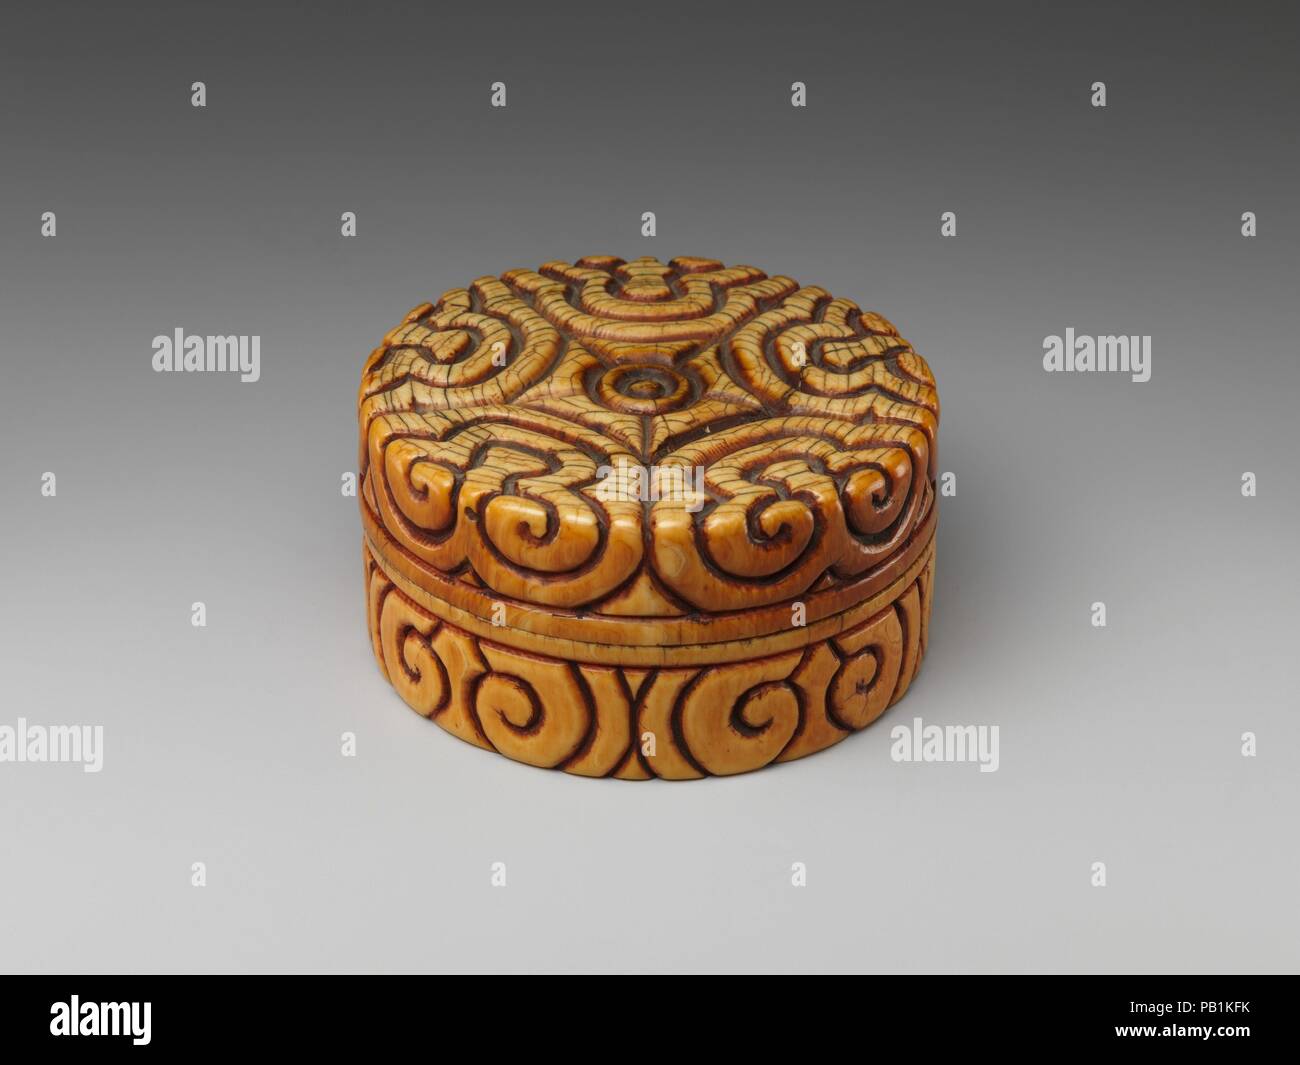 Box with pommel-scroll design. Culture: China. Dimensions: H. 1 7/8 in. (4.8 cm); Diam. 3 1/2 in. (8.9 cm). Date: late 13th-14th century.  The decoration covering the surface of this box is sometimes known as a pommel-scroll design because it resembles the shape of sword's pommel. A flowering plum tree and crescent moon made of ivory, gold leaf, lacquer, and glass, are inlaid into the interior of the cover. The motif may allude to any number of earlier poems that evoke the shadows of plum blossoms by moonlight in a night filled with their scent. Museum: Metropolitan Museum of Art, New York, US Stock Photo